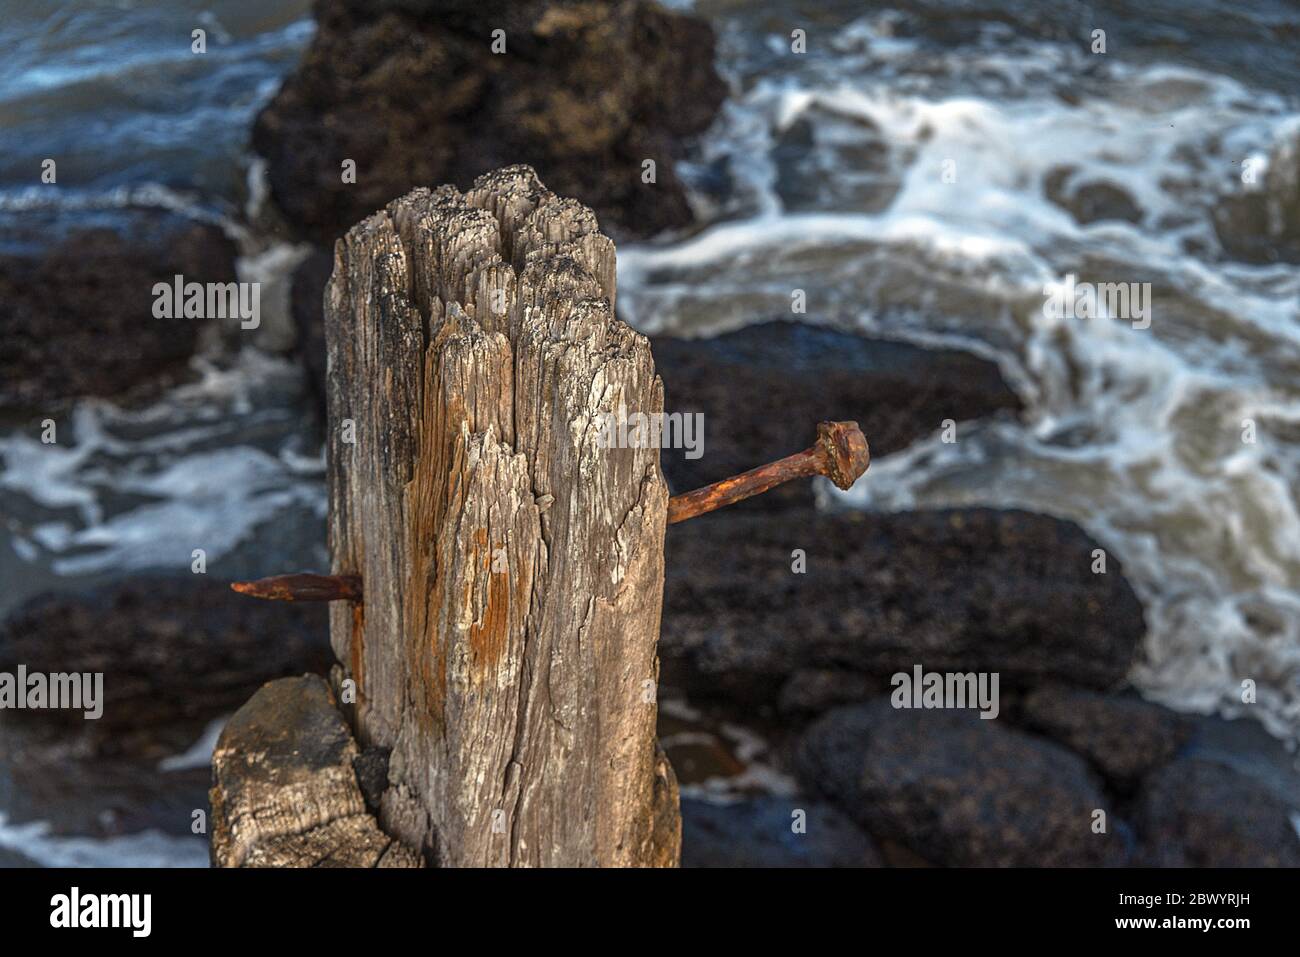 Urban decay. Metal, stone, bricks and wood turning into organic structures due to the action of the tide. Stock Photo